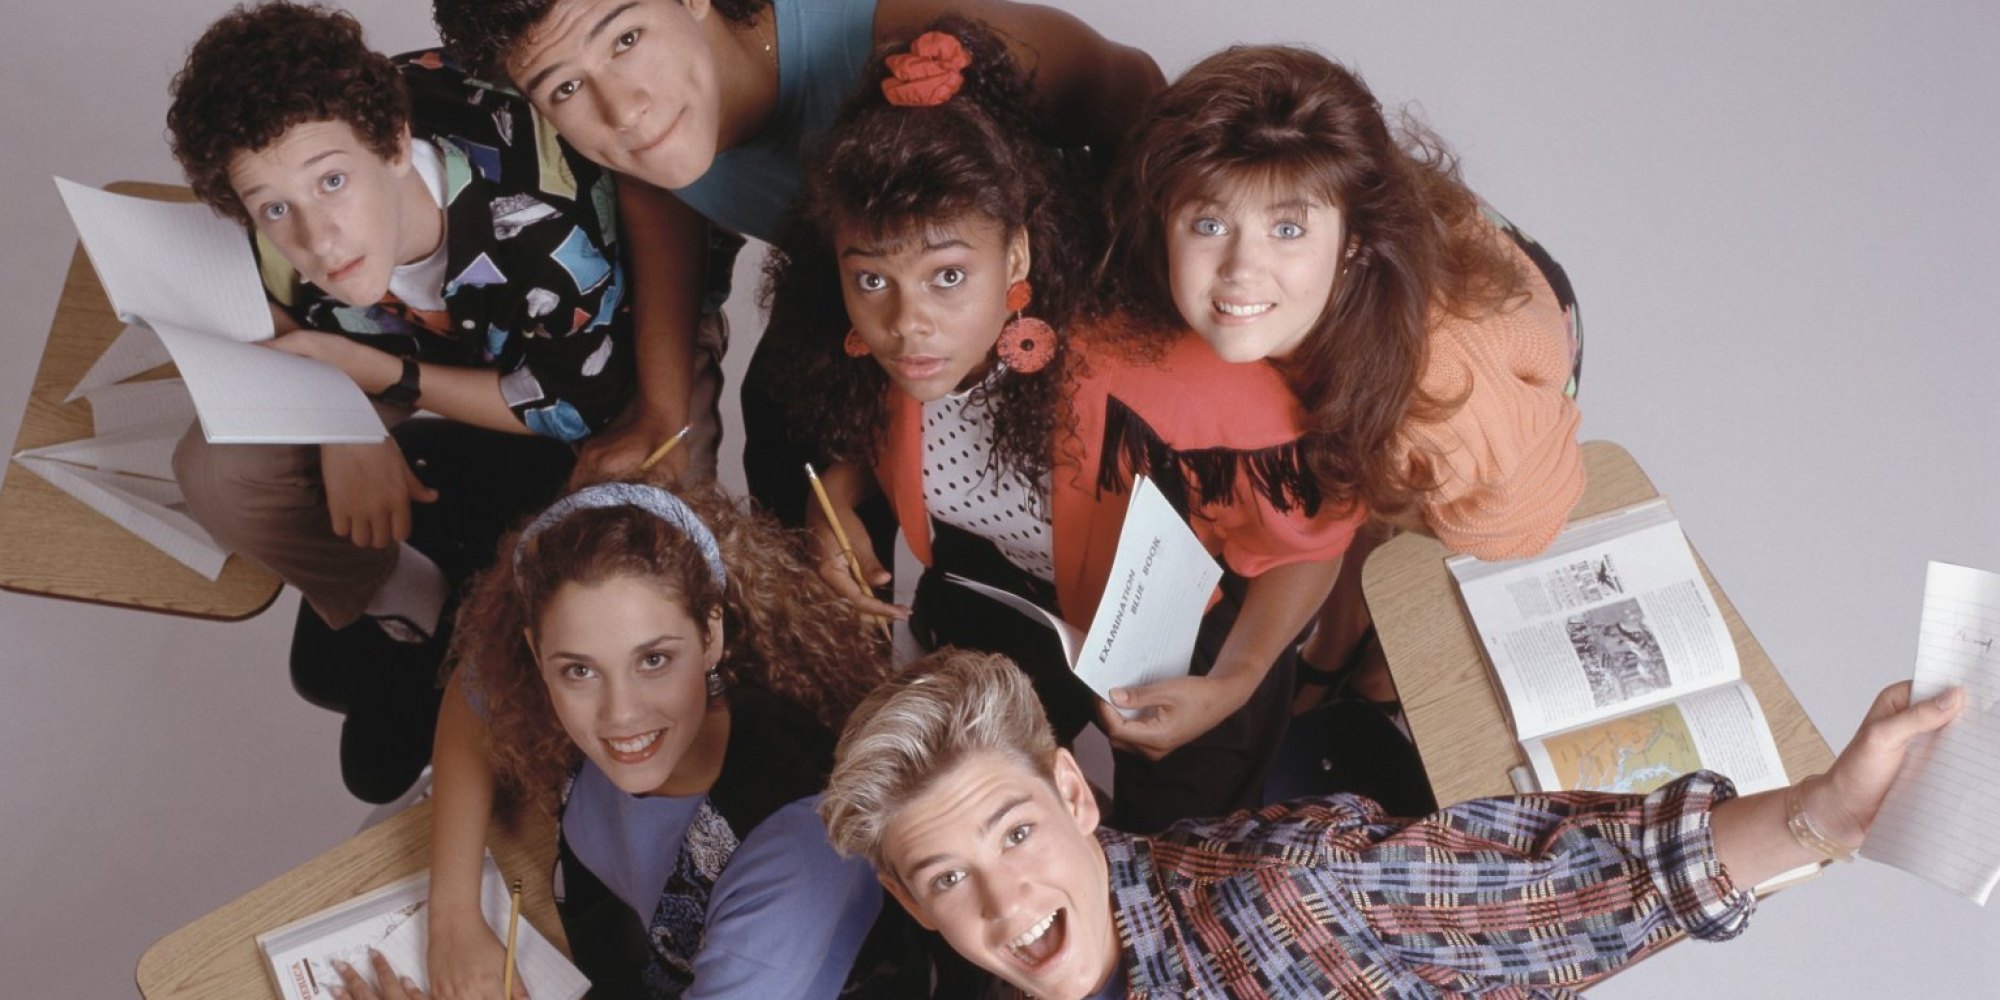 A Saved By The Bell Behind The Scenes Tv Movie Is Coming